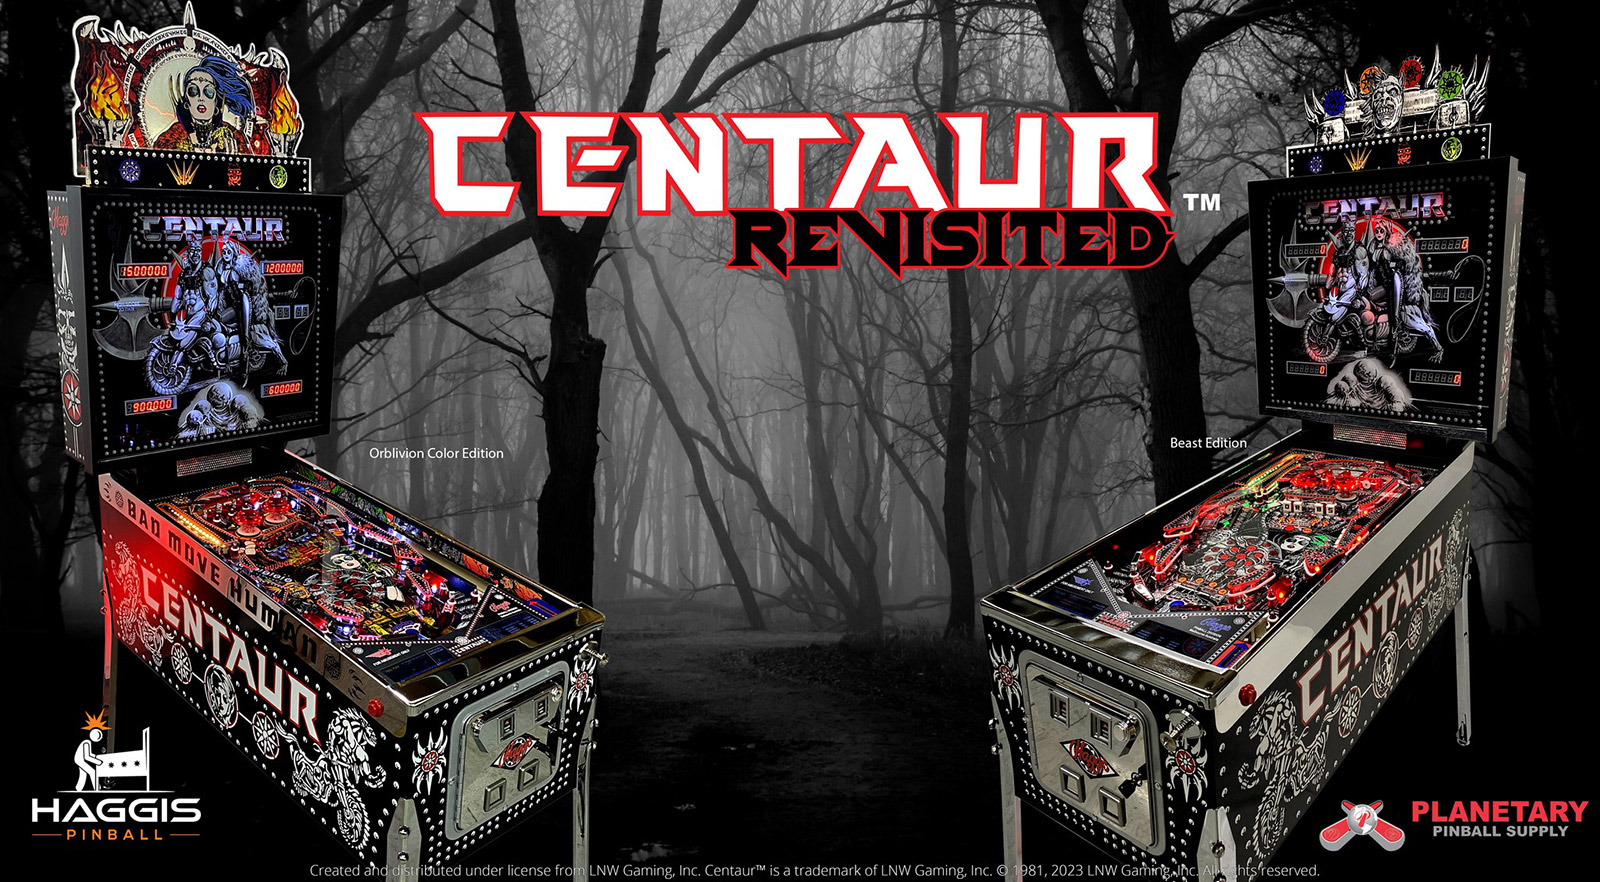 CENTAUR REVISITED ANNOUNCED – Welcome to Pinball News – First & Free